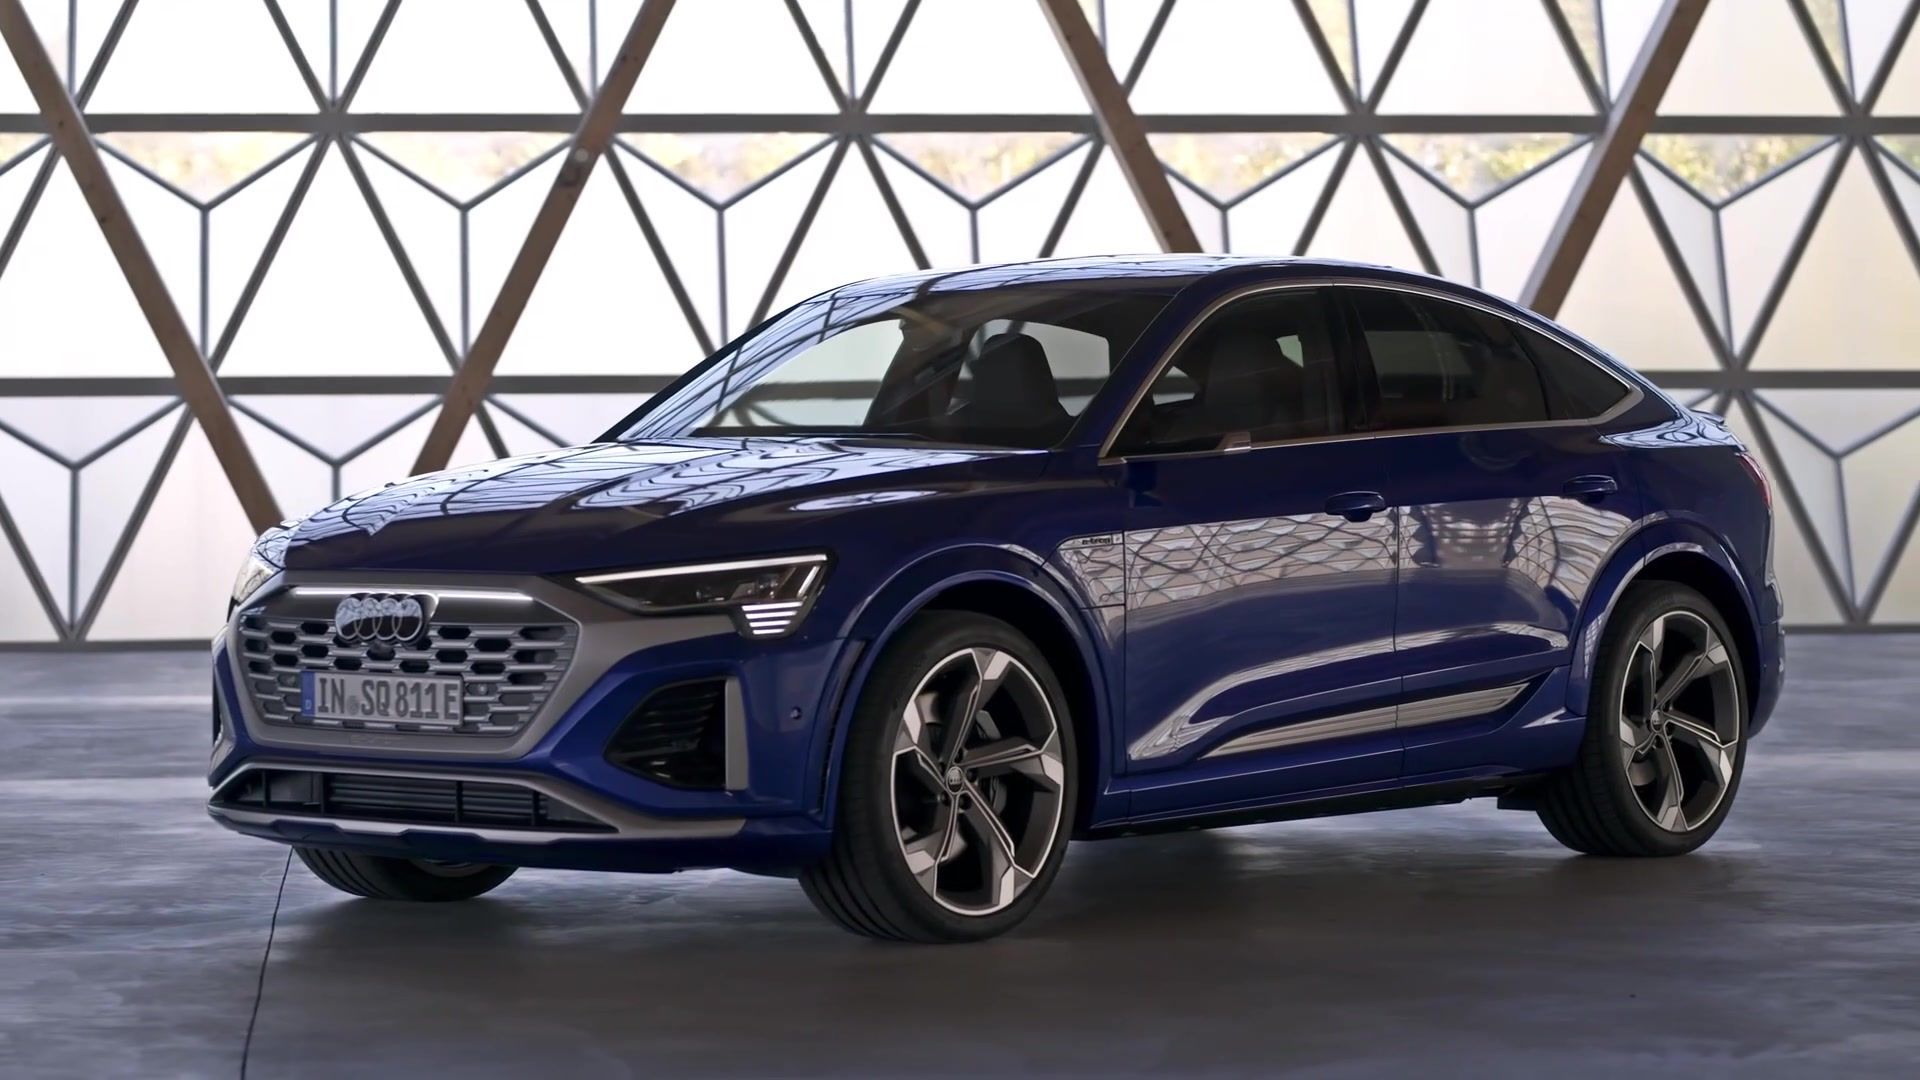 The new Audi Q8 e-tron - New face, new name and new corporate identity